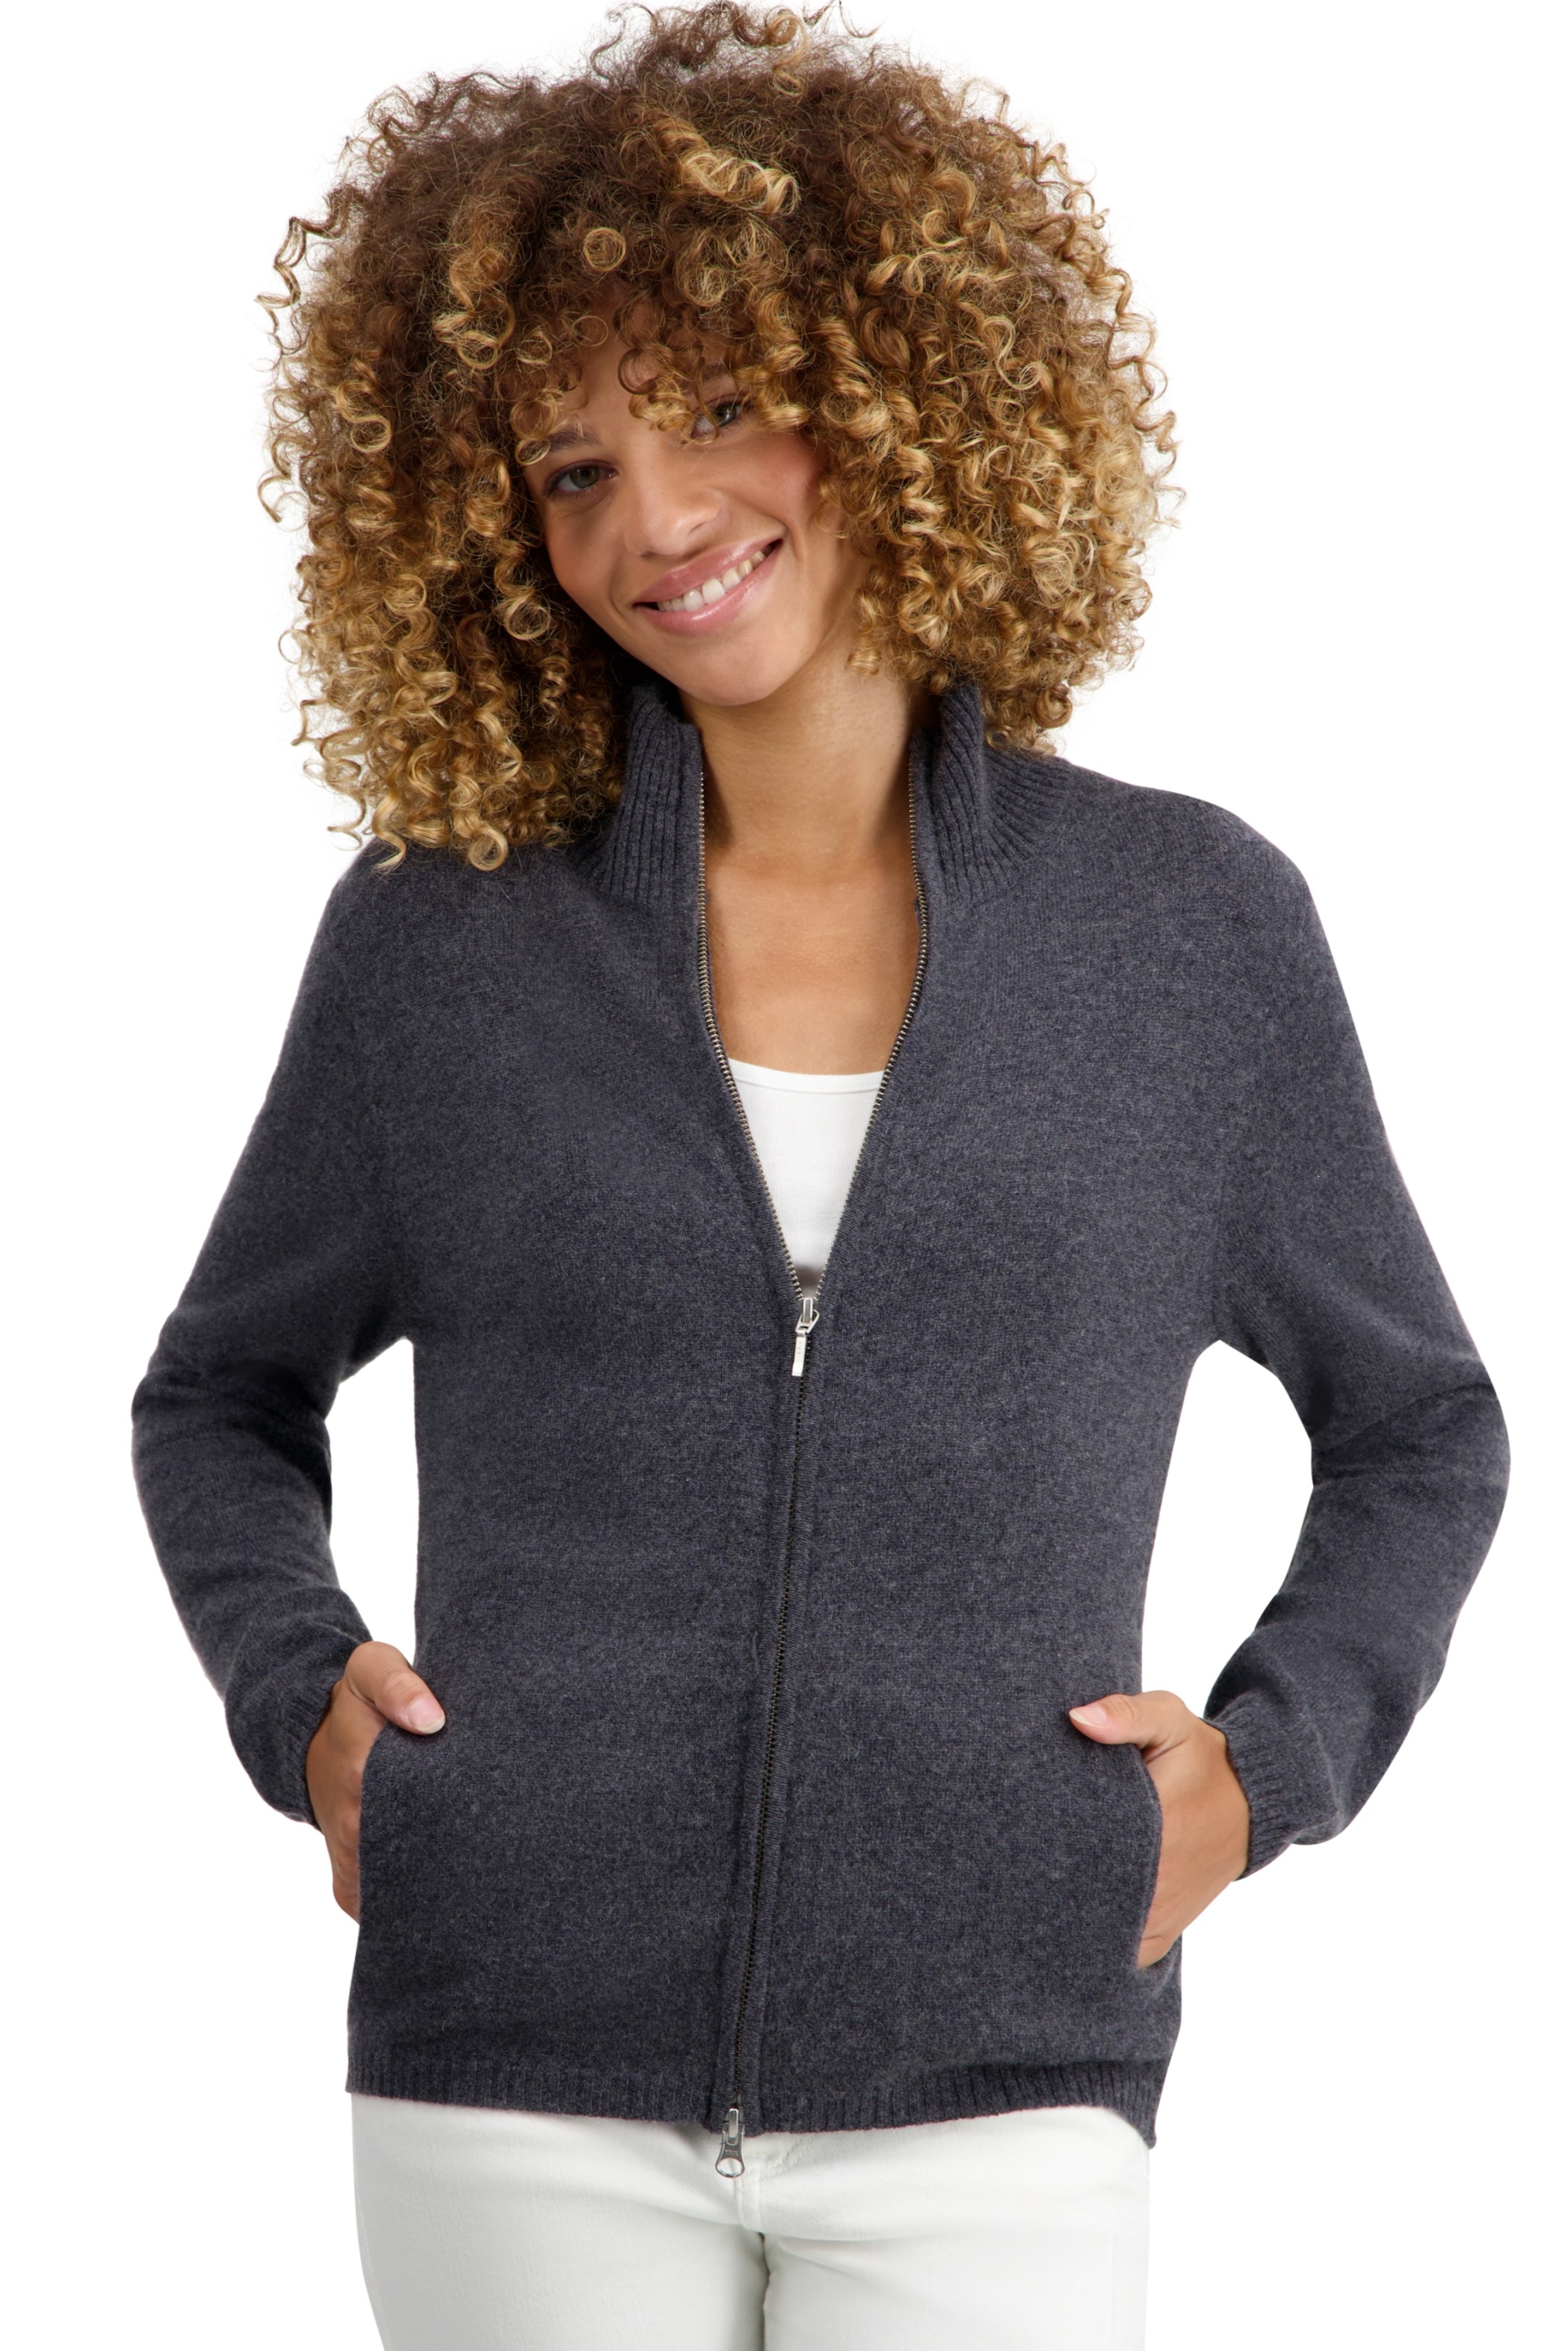 Cashmere ladies basic sweaters at low prices thames first charcoal marl m